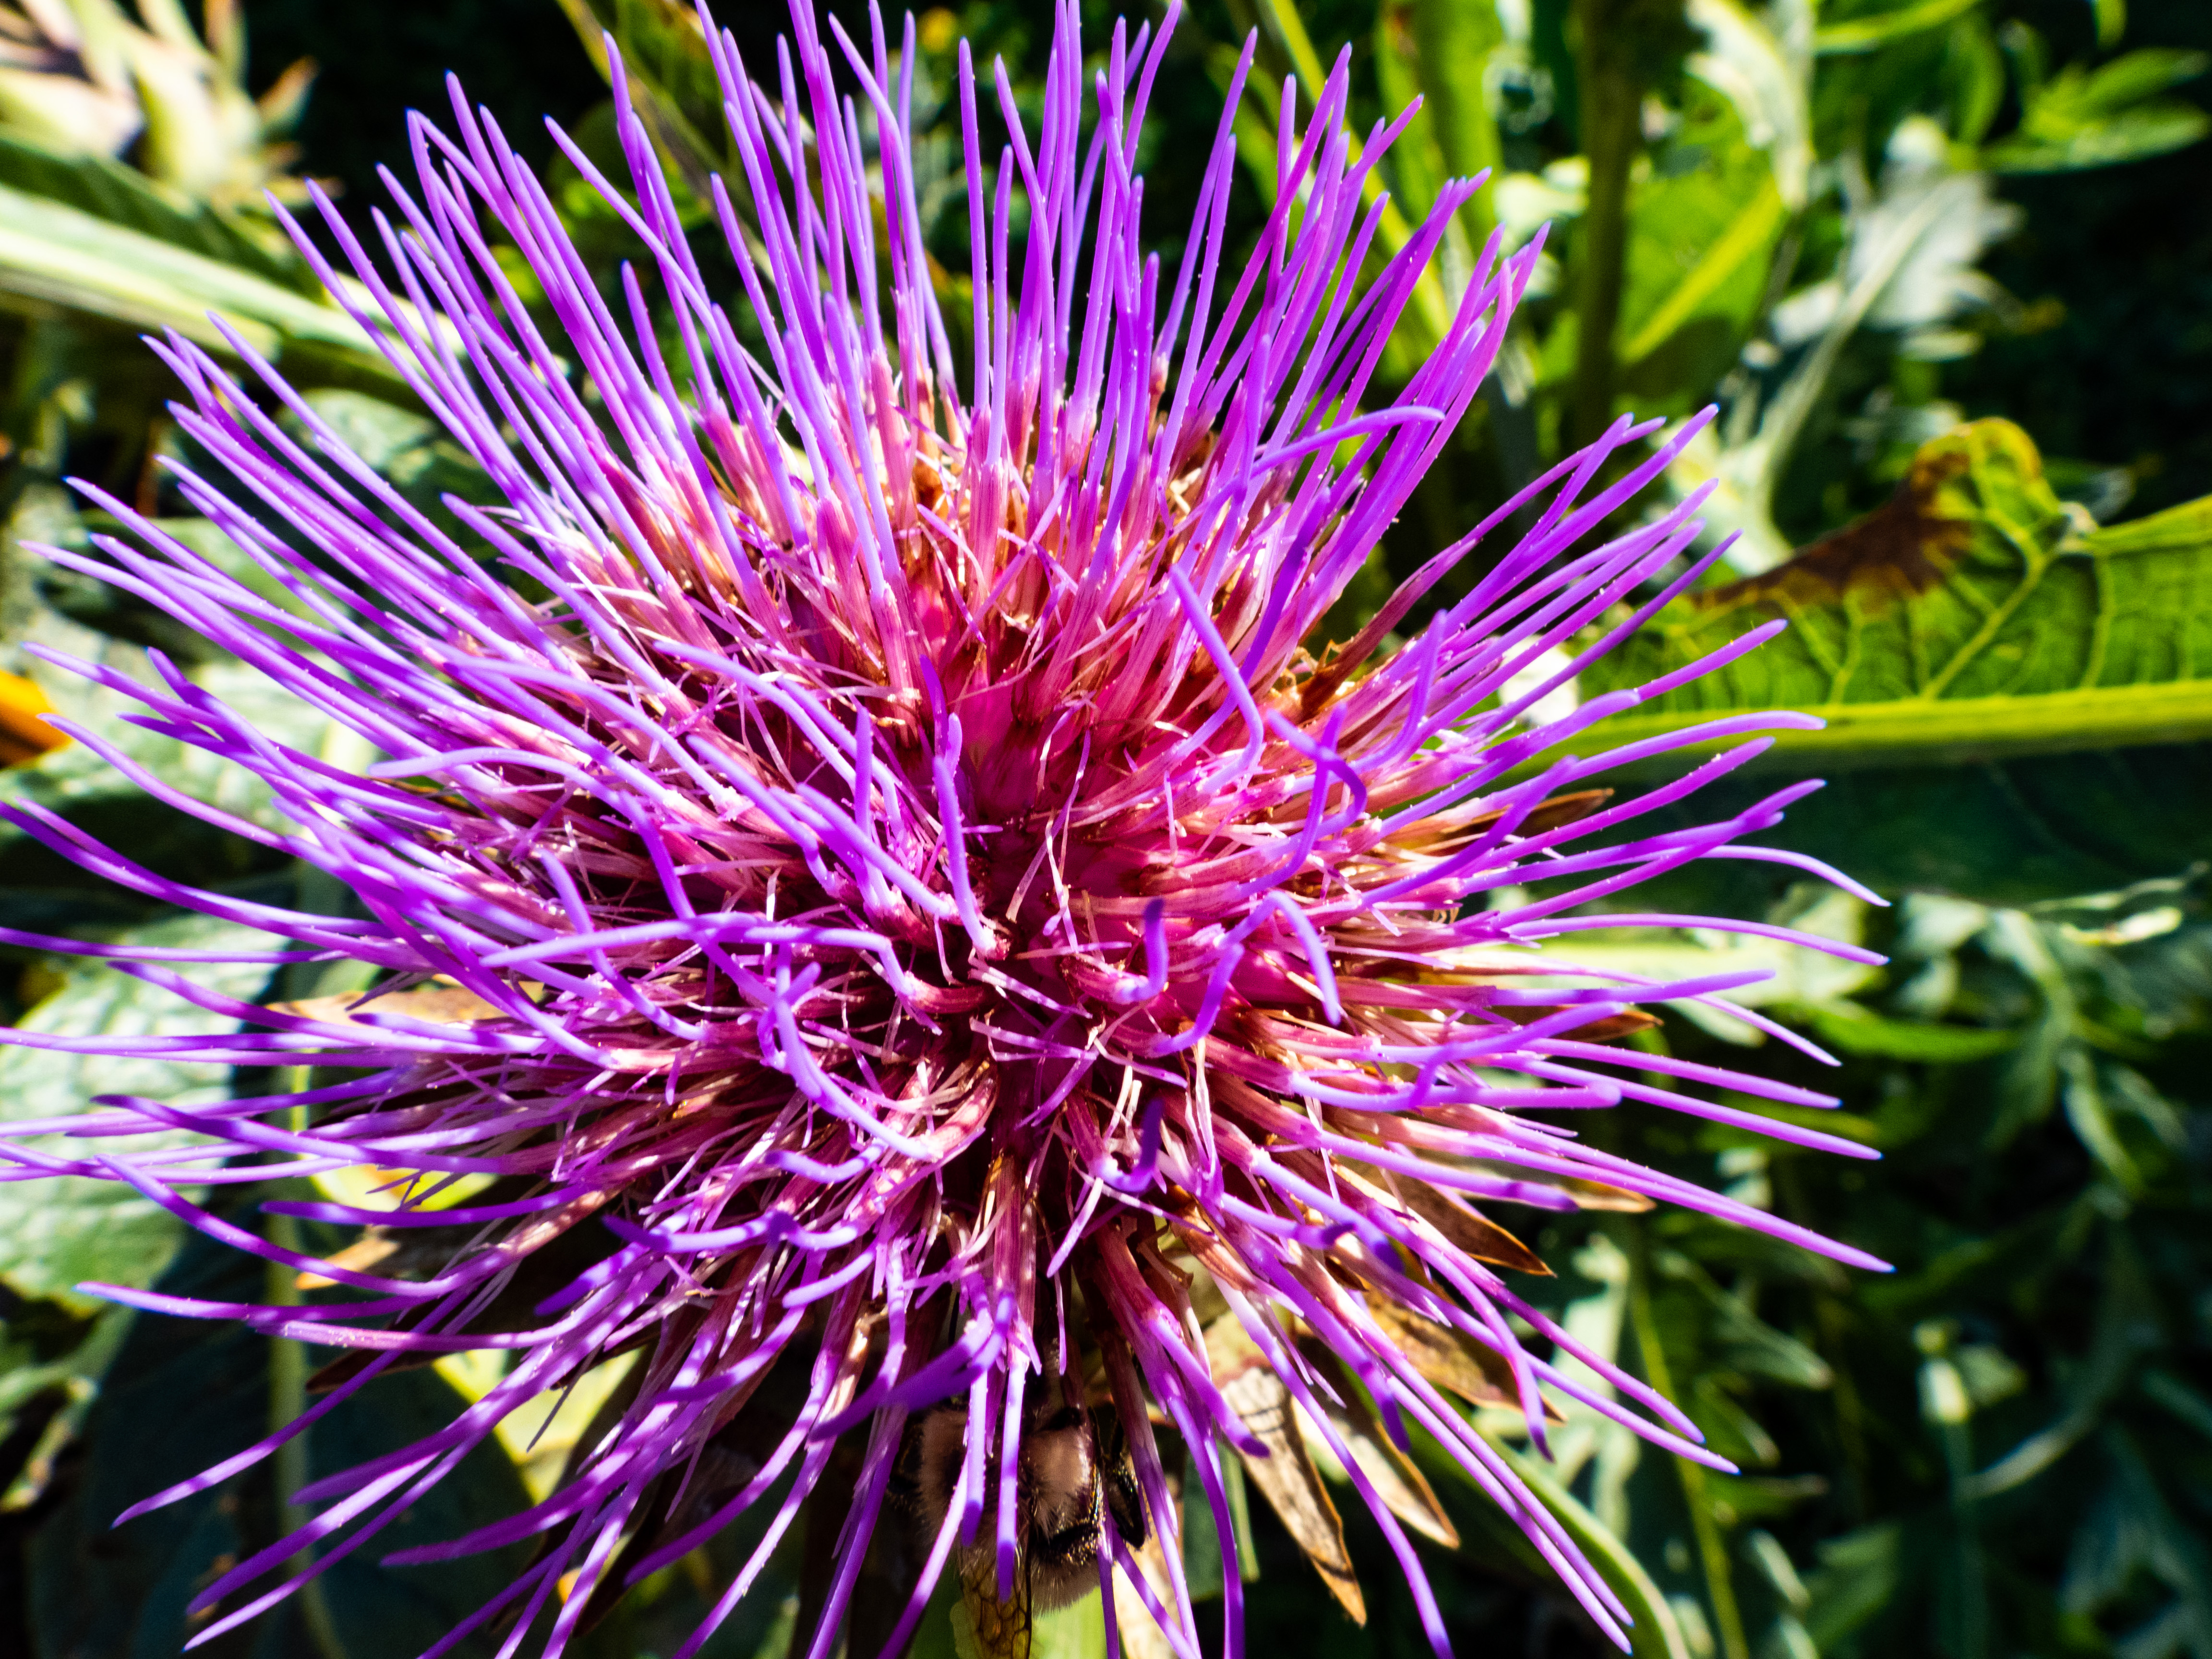 Purple Flower With Many Long Spiny